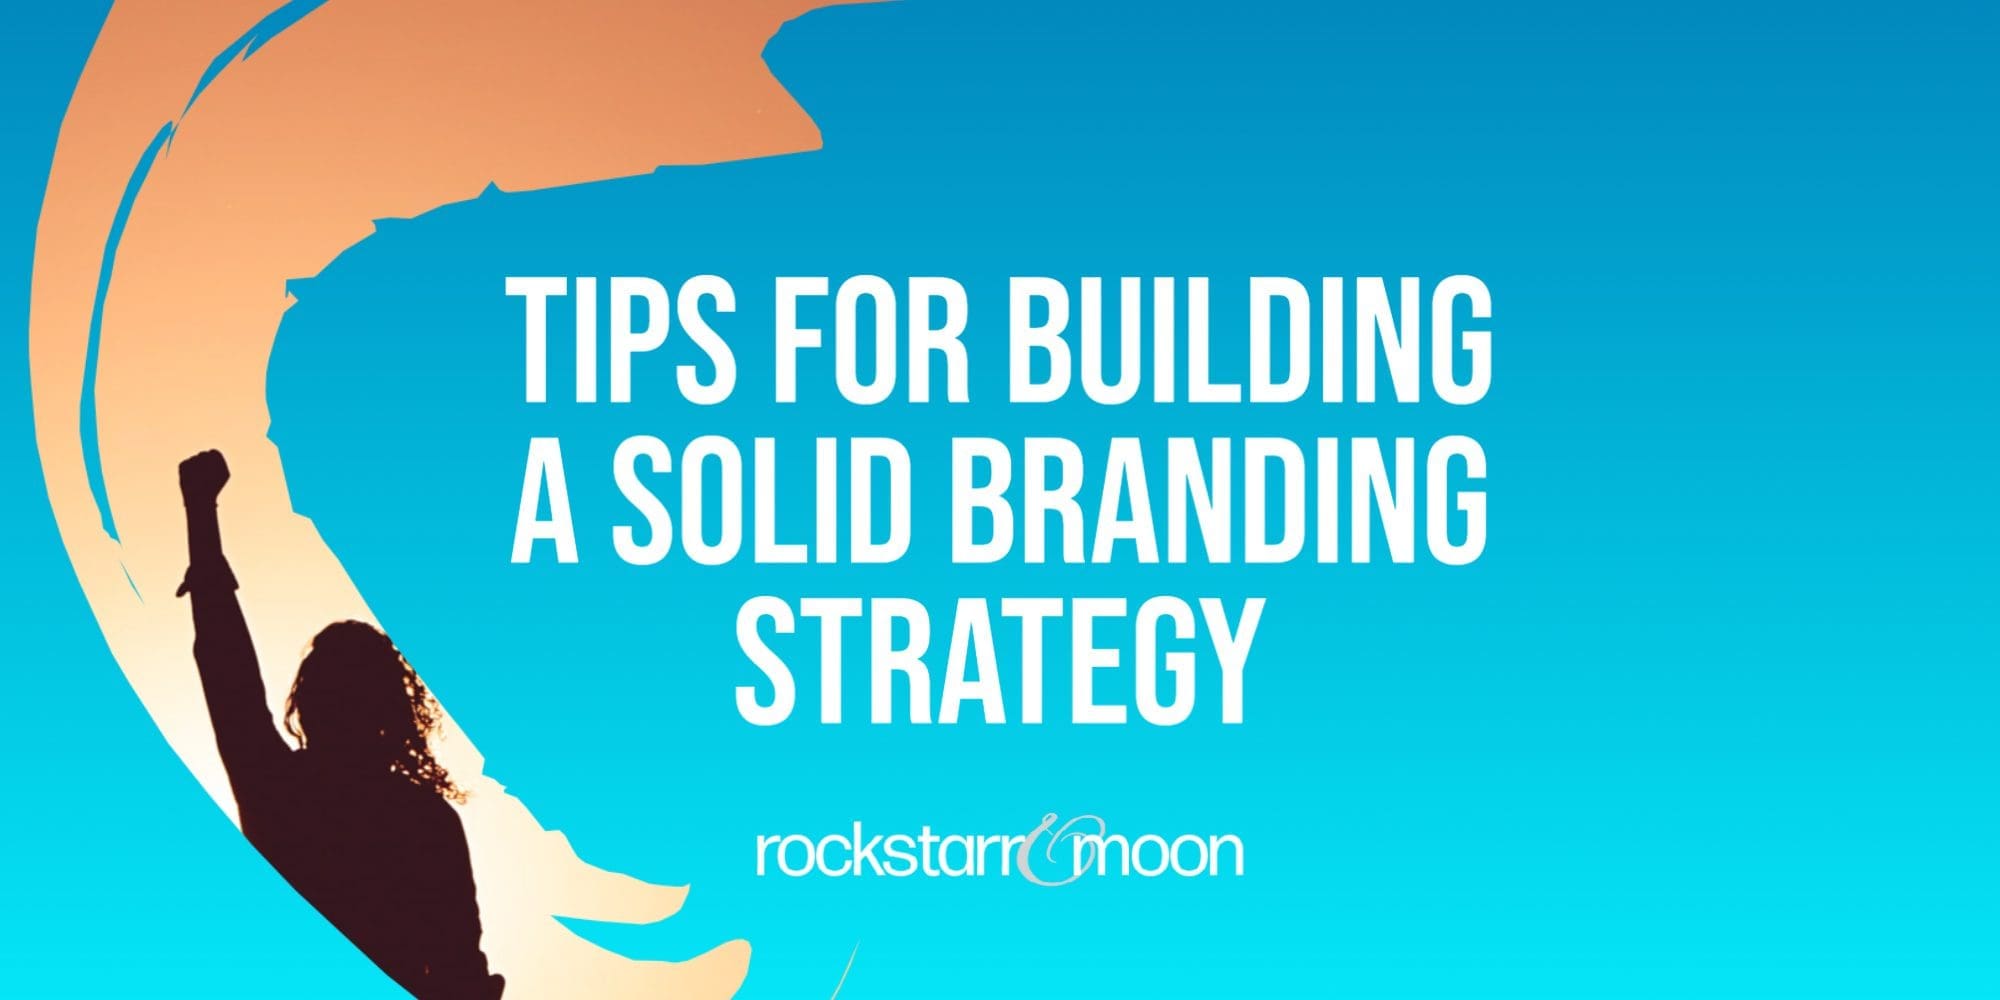 Tips For Building a Solid Branding Strategy